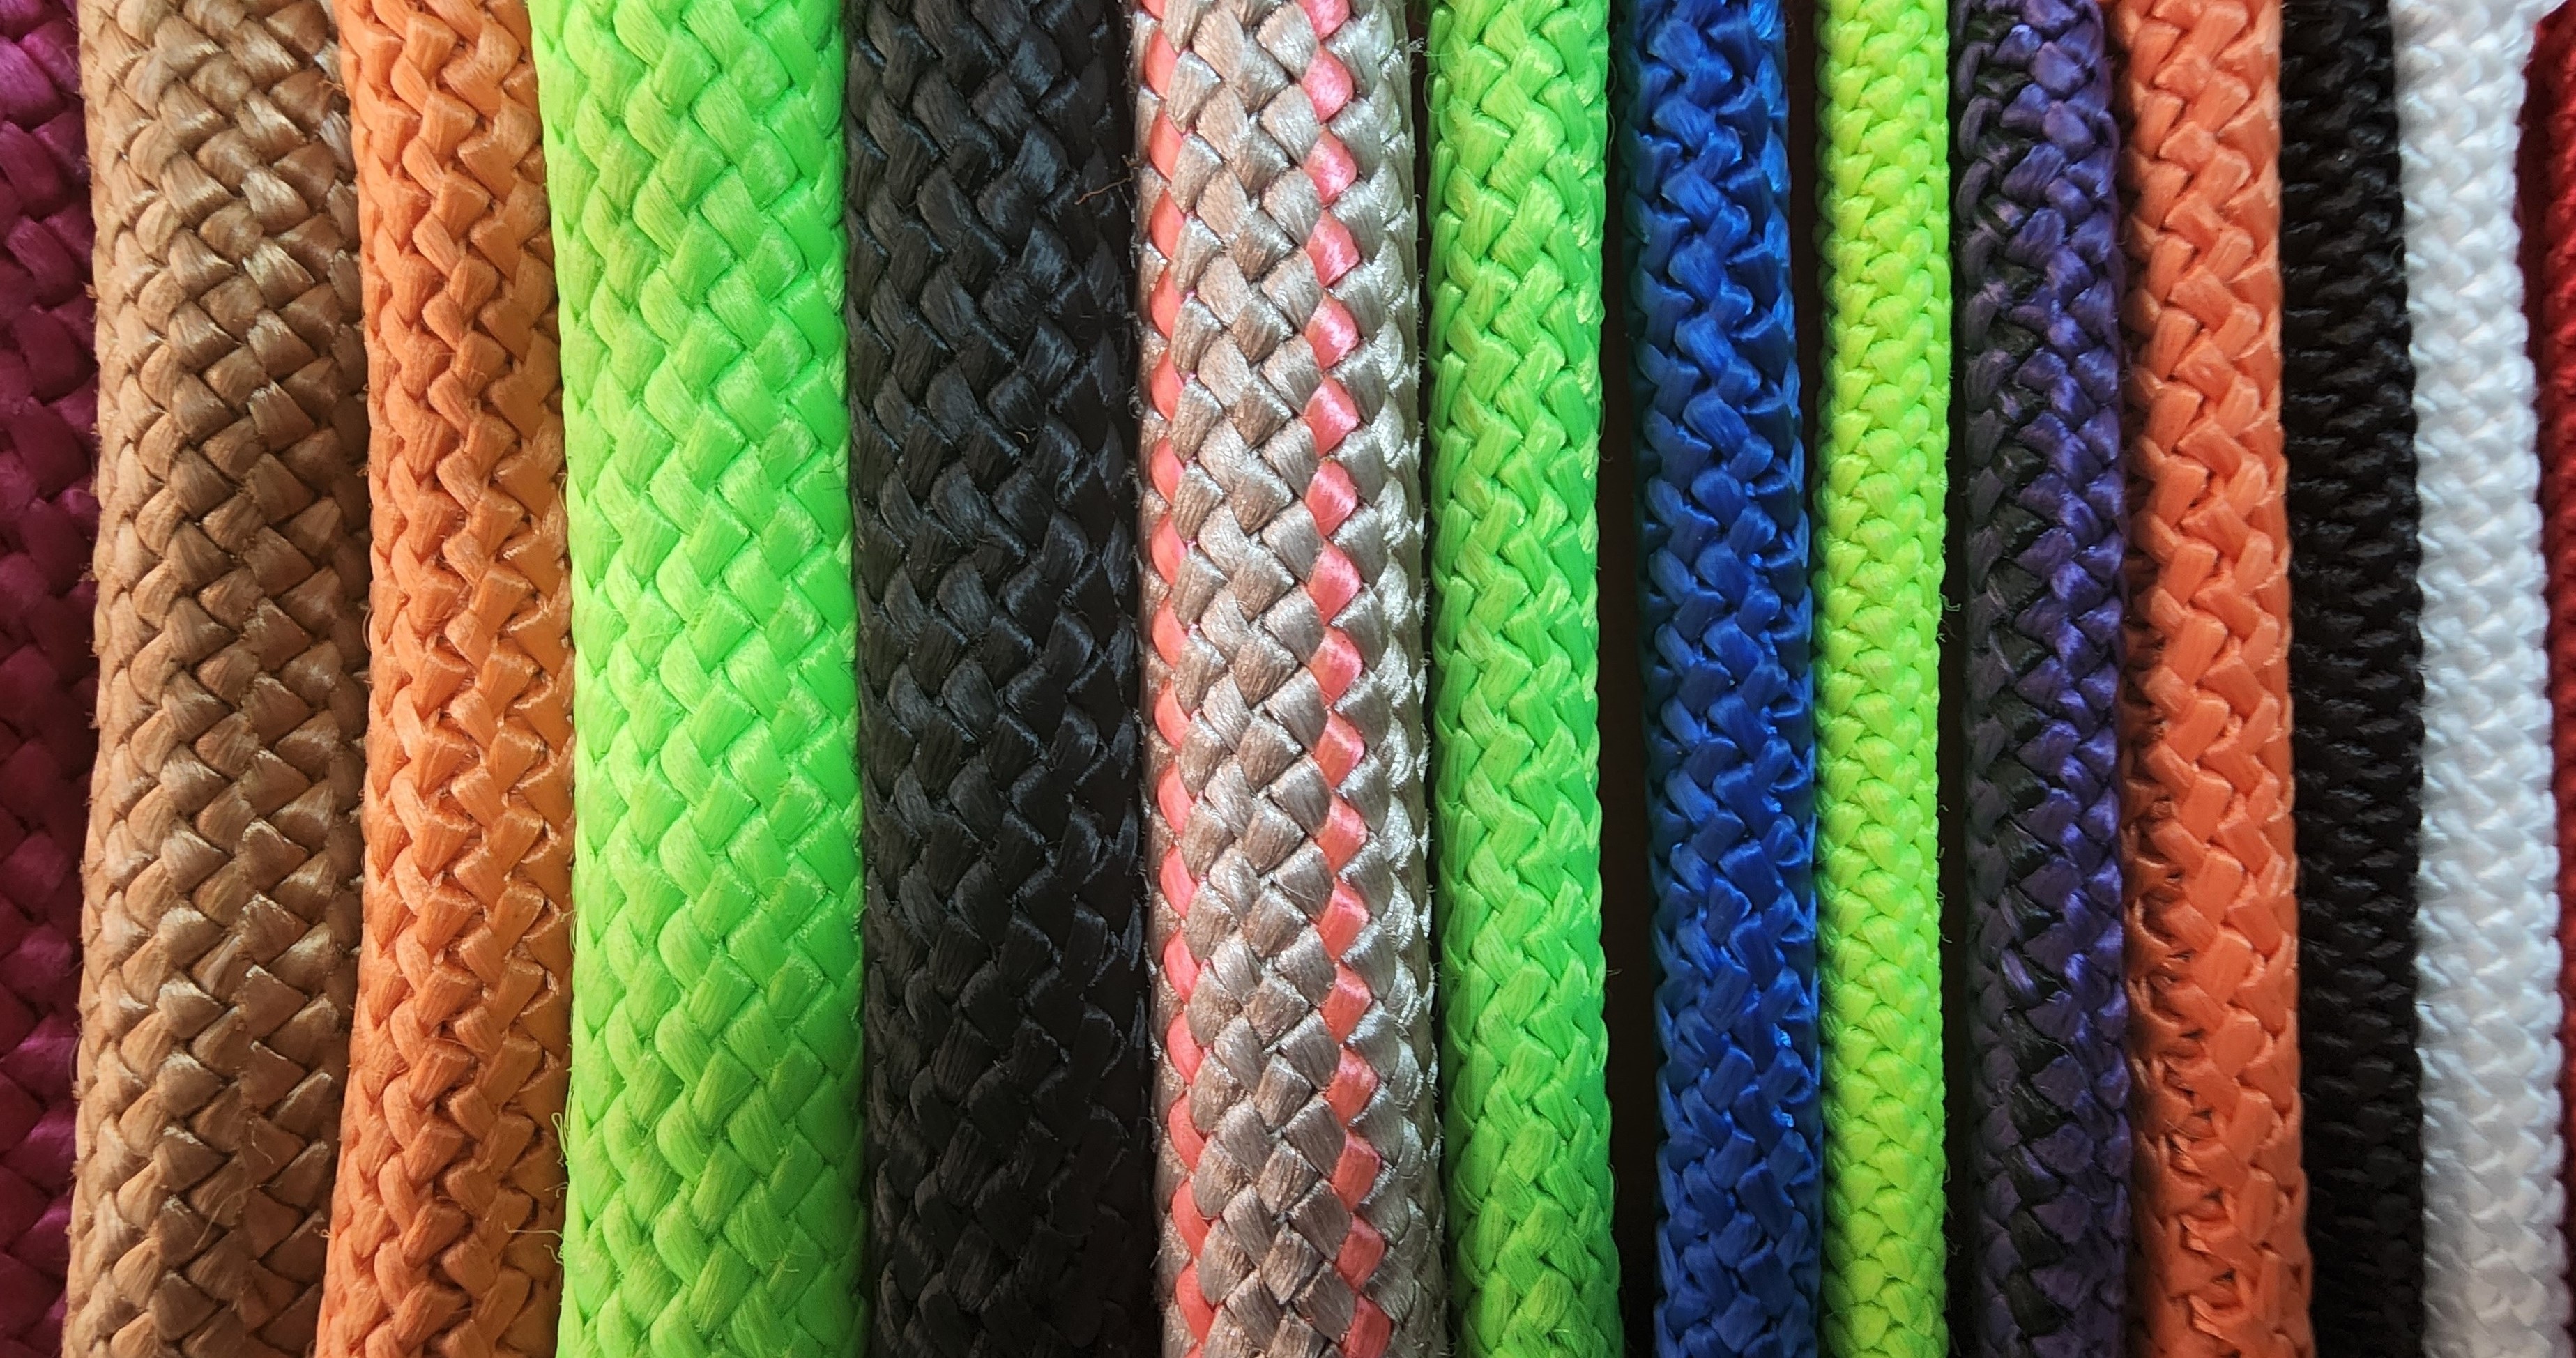 https://www.ppcypl.com/assets/images/products/pp_braided_rope%20(2)_2022_09_25_07_21_01.jpg